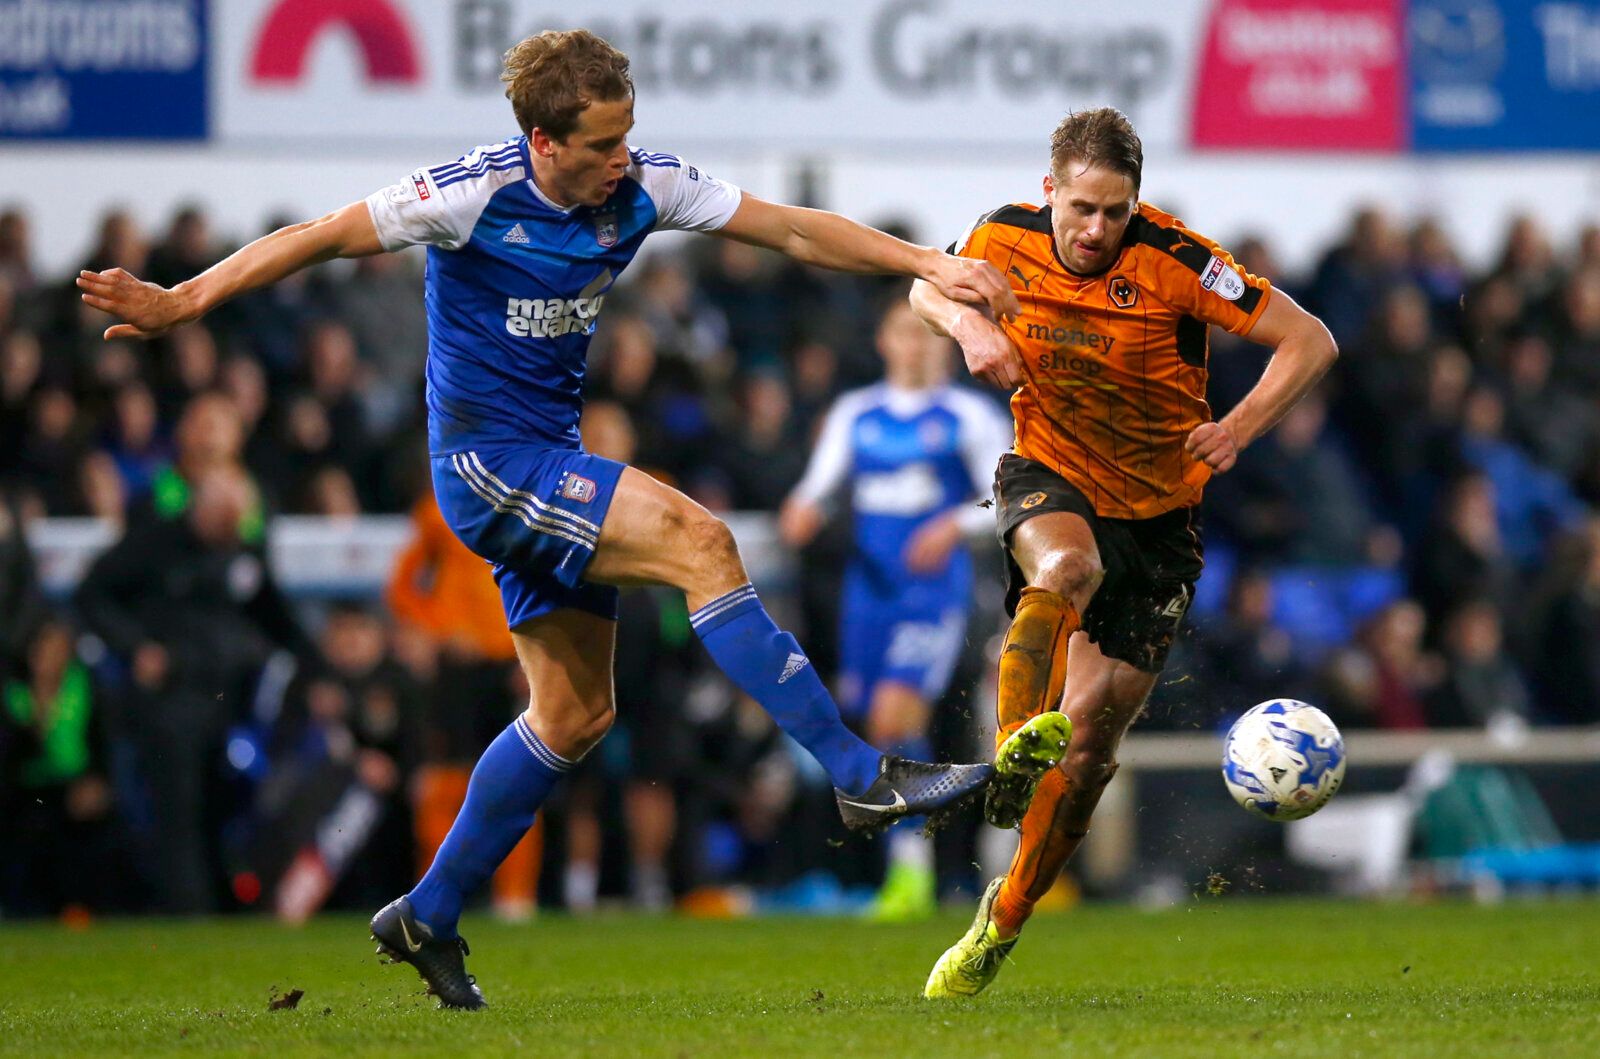 Britain Football Soccer - Ipswich Town v Wolverhampton Wanderers - Sky Bet Championship - Portman Road - 7/3/17 Ipswich Town's Christophe Berra in action with Wolves' Dave Edwards (R) Mandatory Credit: Action Images / Peter Cziborra Livepic EDITORIAL USE ONLY. No use with unauthorized audio, video, data, fixture lists, club/league logos or 